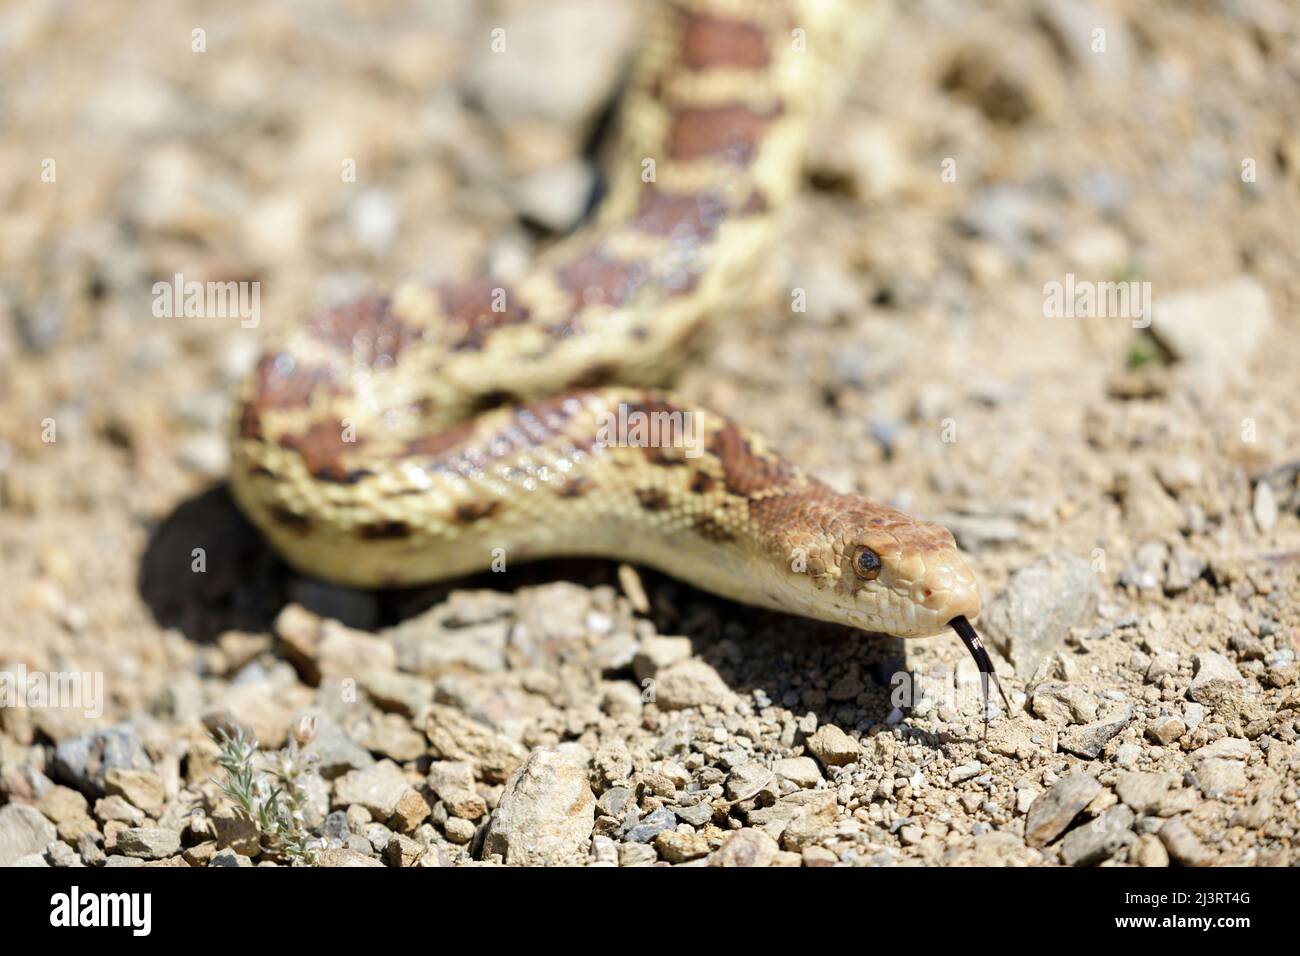 Pacific Gopher Snake Adult Sticking Out Tongue. Joseph D Grant Ranch County Park, Santa Clara County, California, USA. Stock Photo